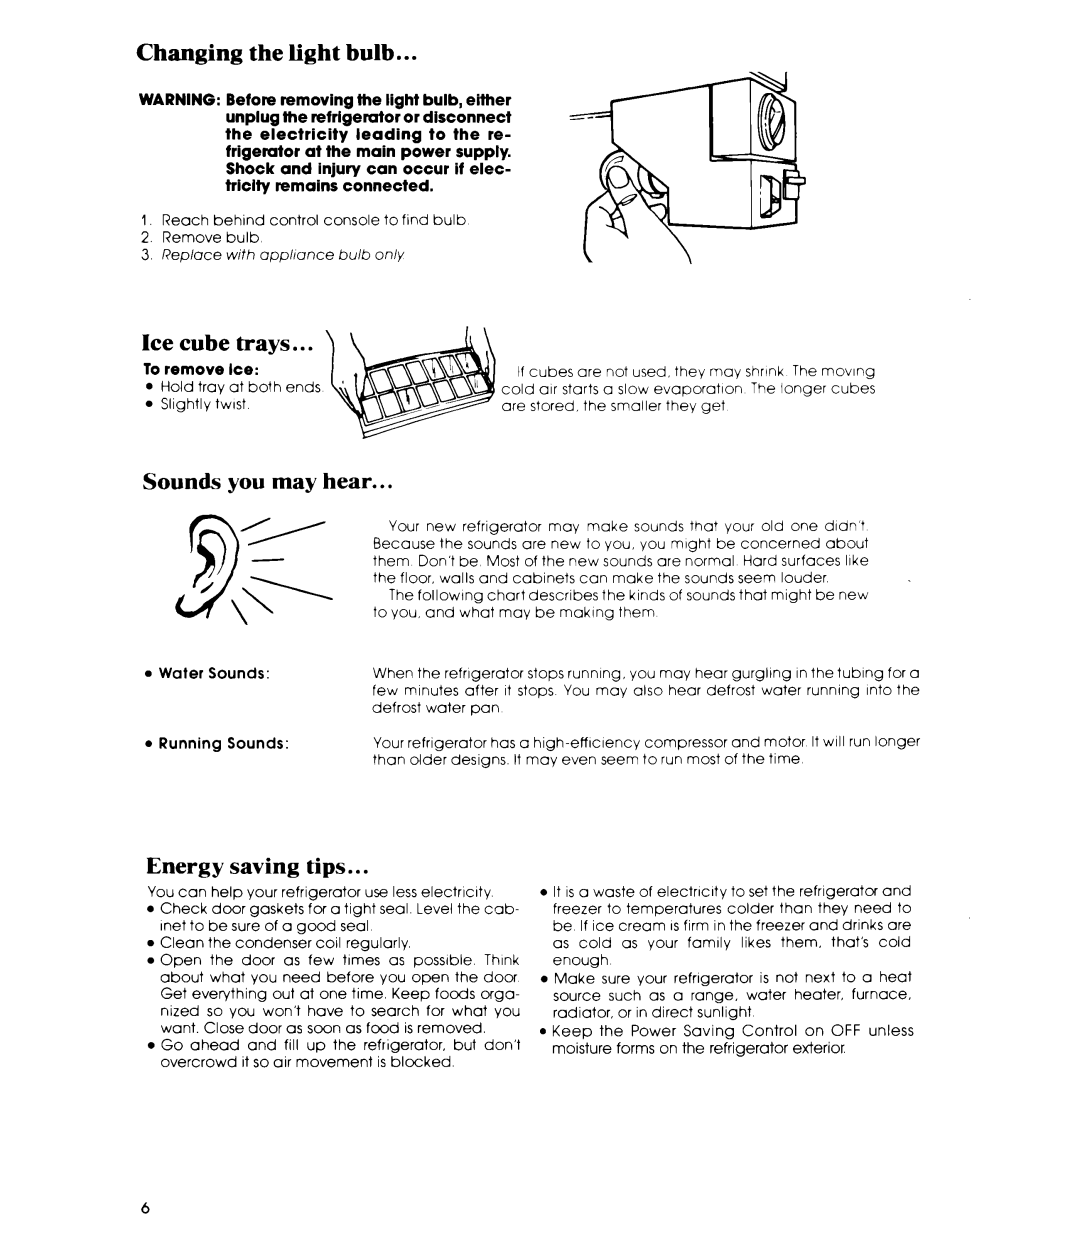 Whirlpool ETl2EC manual Changing the light bulb, Ice cube trays, Sounds you may hear, Energy saving tips 